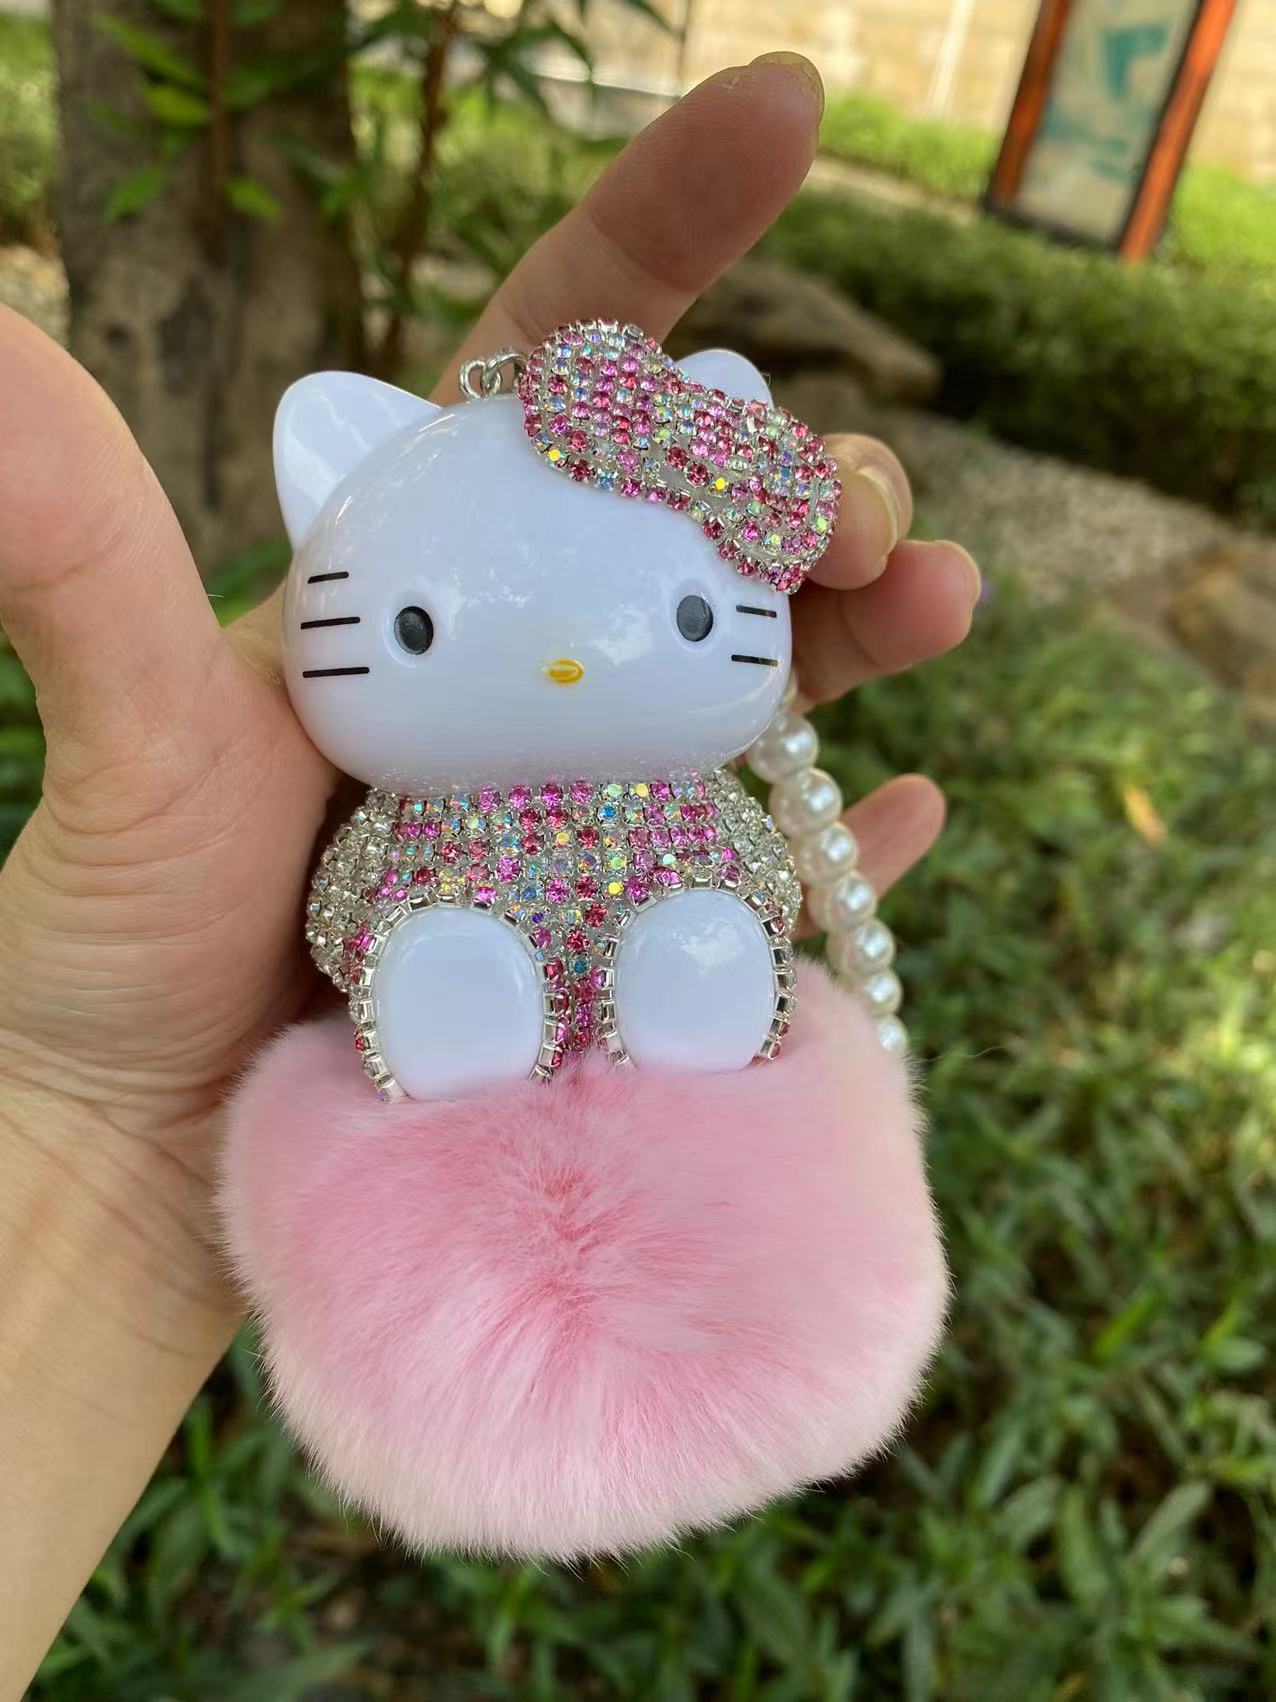 Hello Kitty Cute Pendant Hair Ball With Glitter Crystals Car Accessories